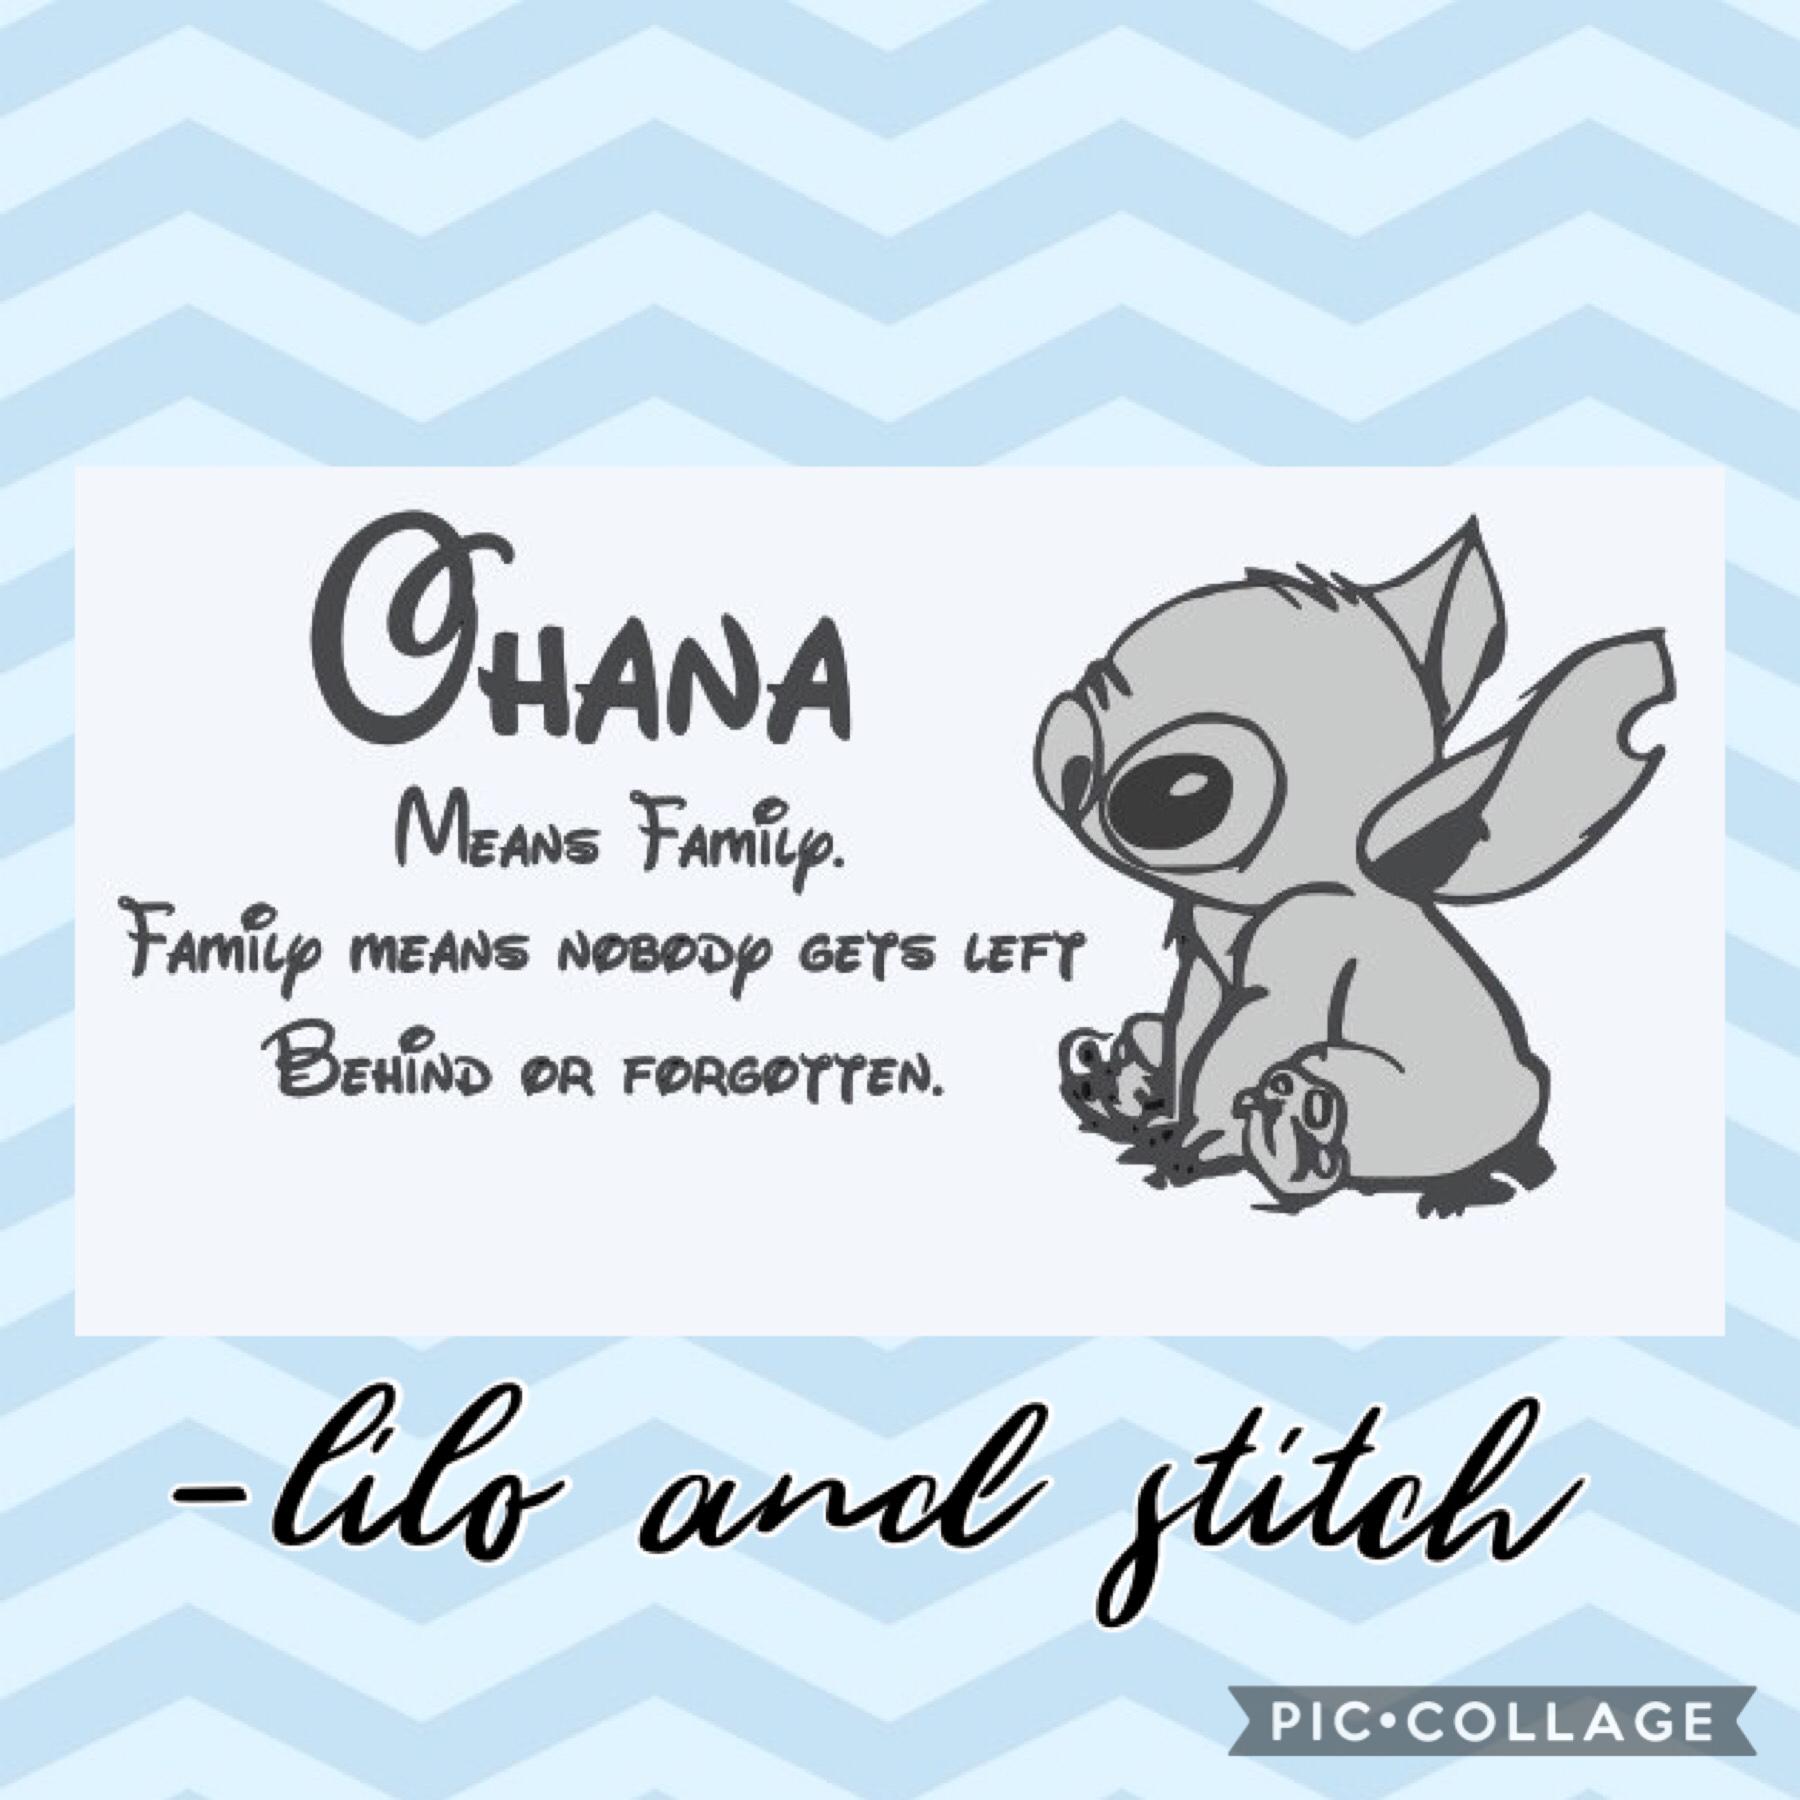 i love lilo and stitch ❤️  hope everyone has a good day 